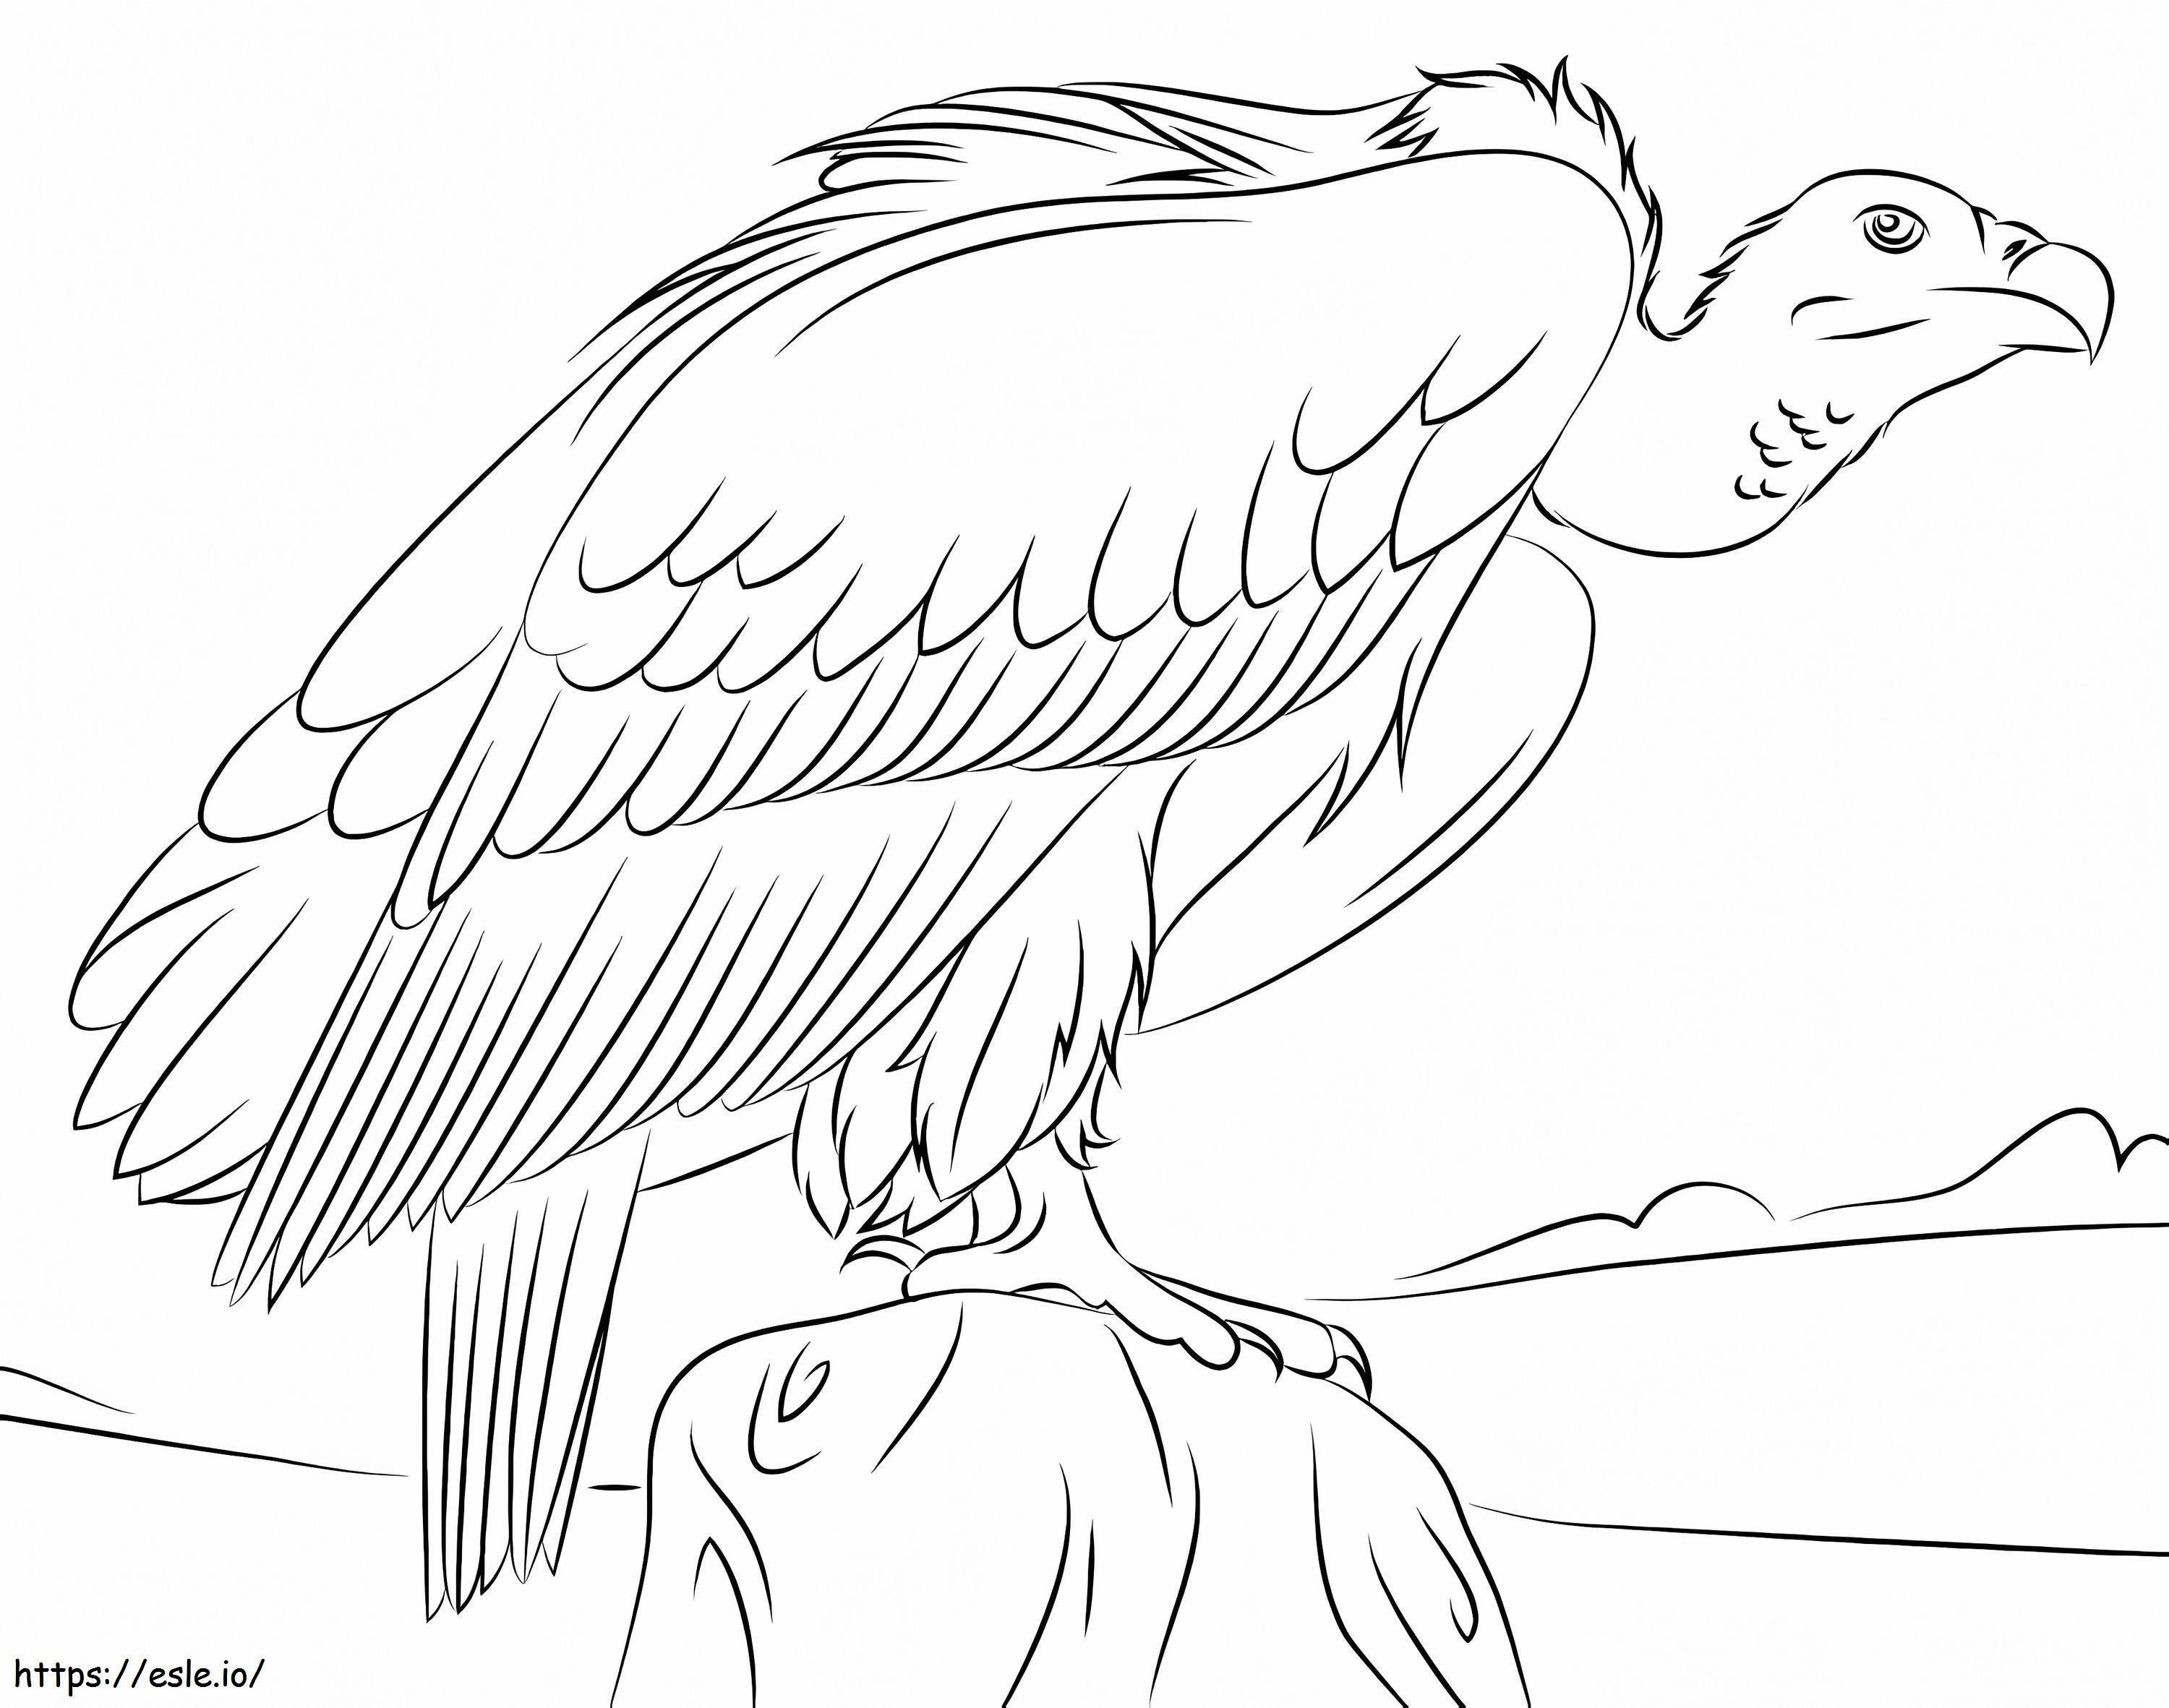 Easy Vulture coloring page